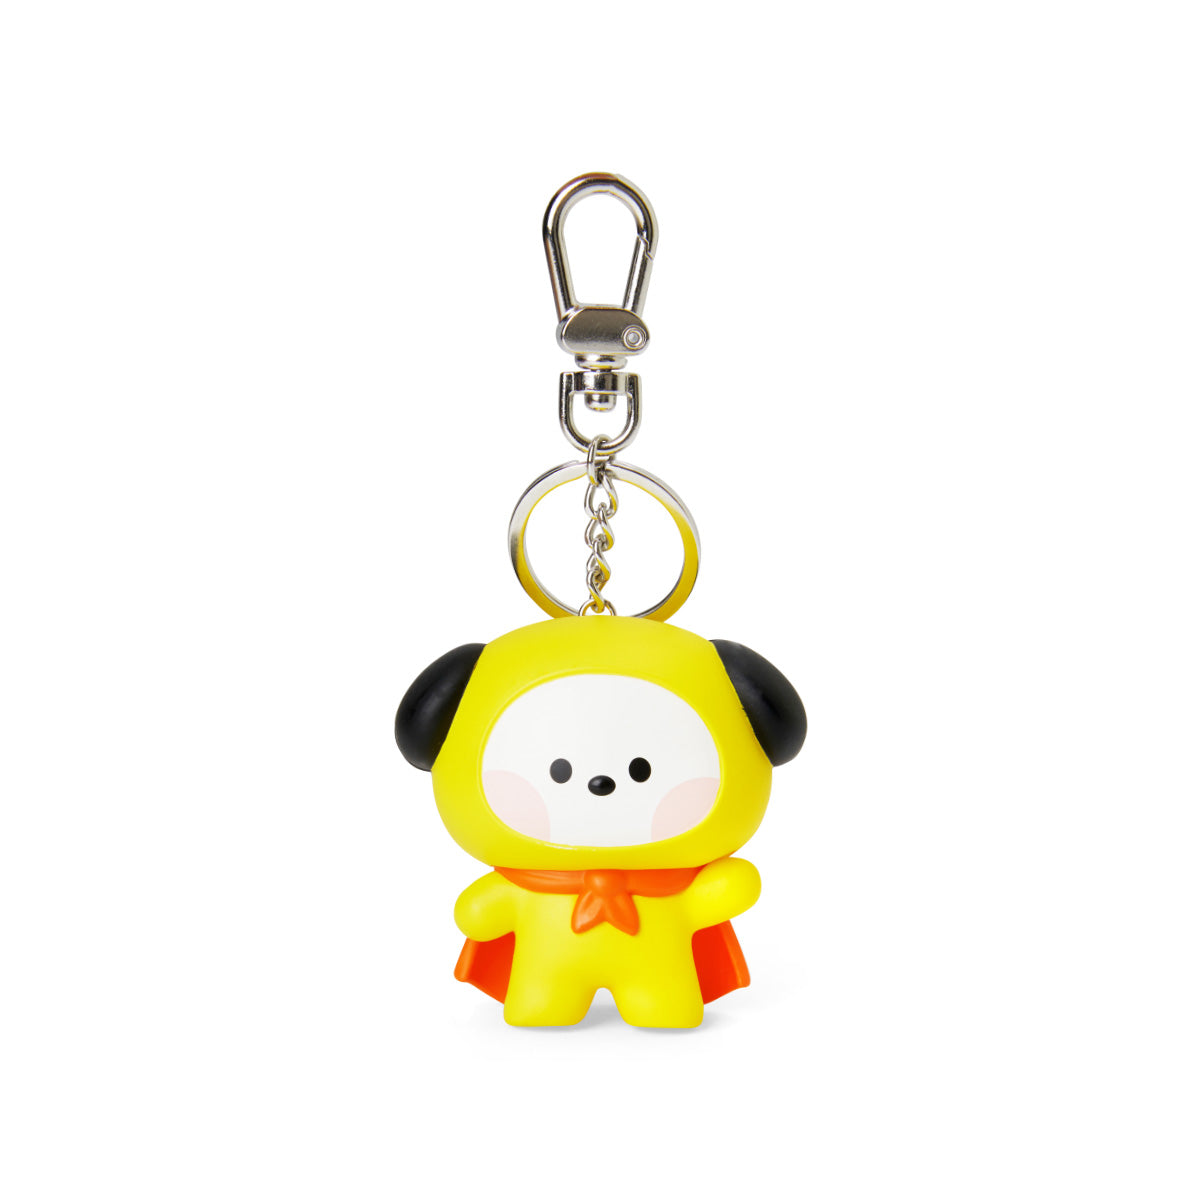 BT21 CHIMMY minini FIGURINE SOUND KEYRING – LINE FRIENDS COLLECTION STORE